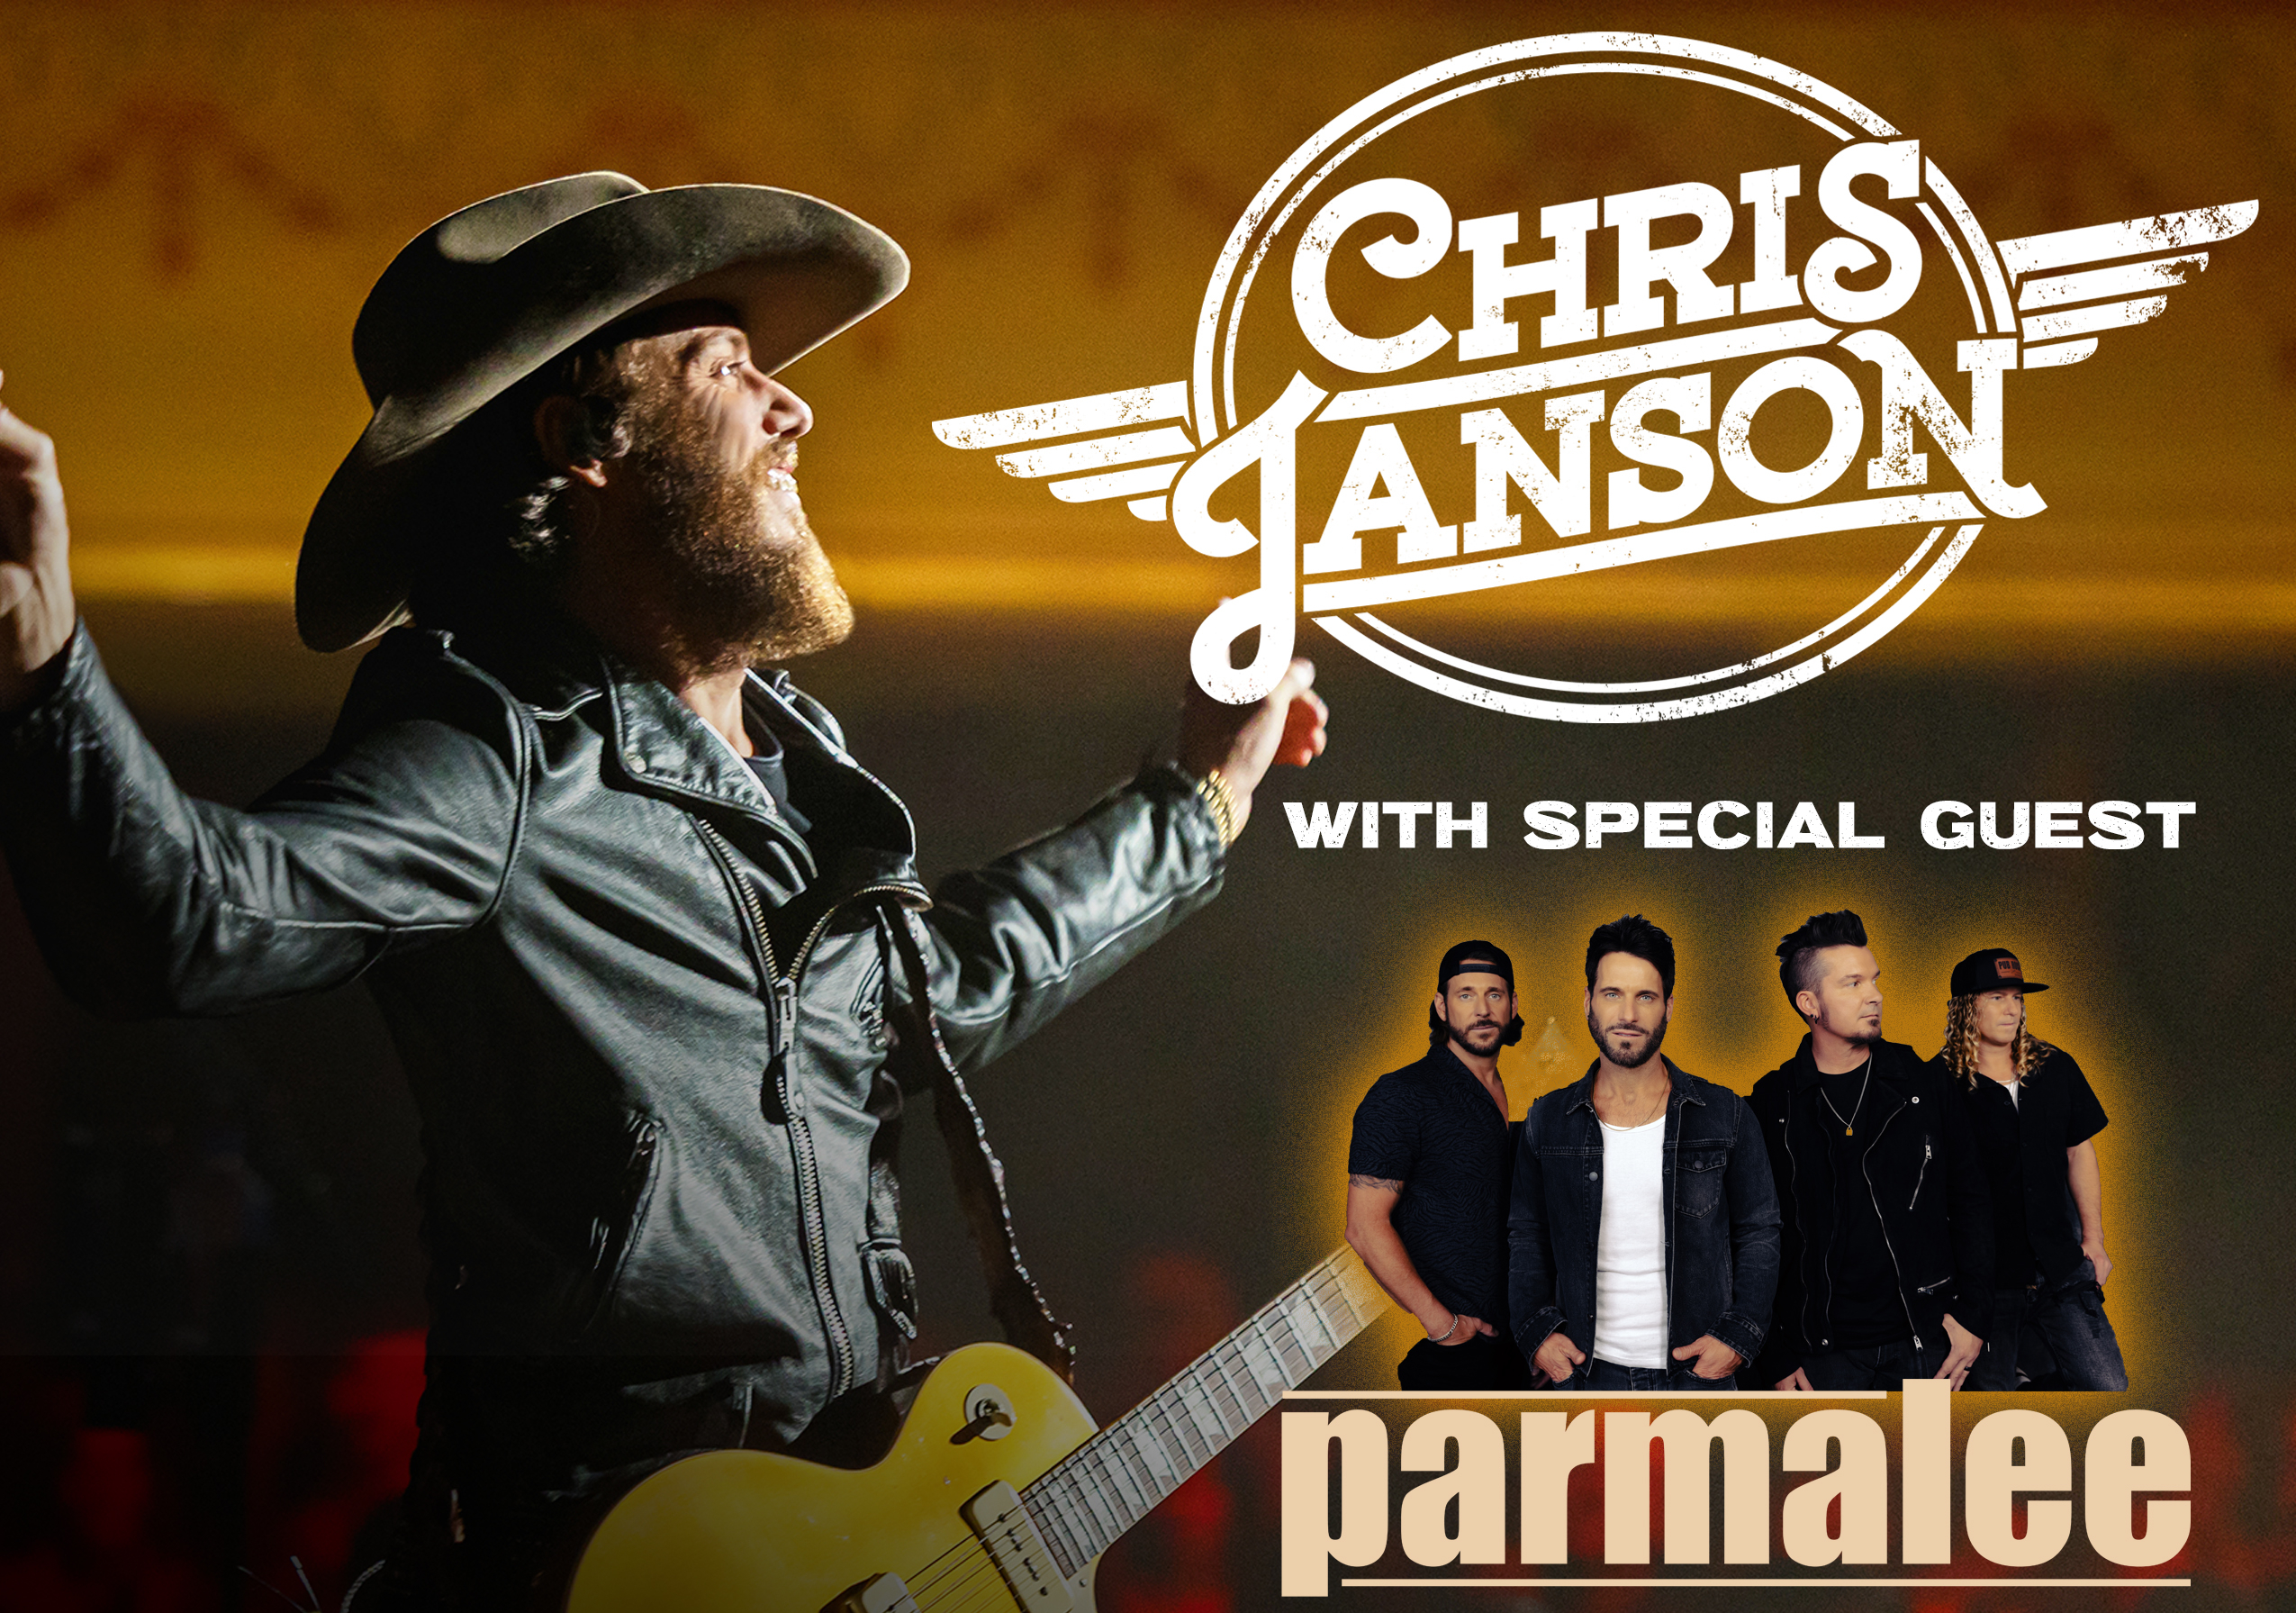 Chris Janson and Parmalee in Modesto!